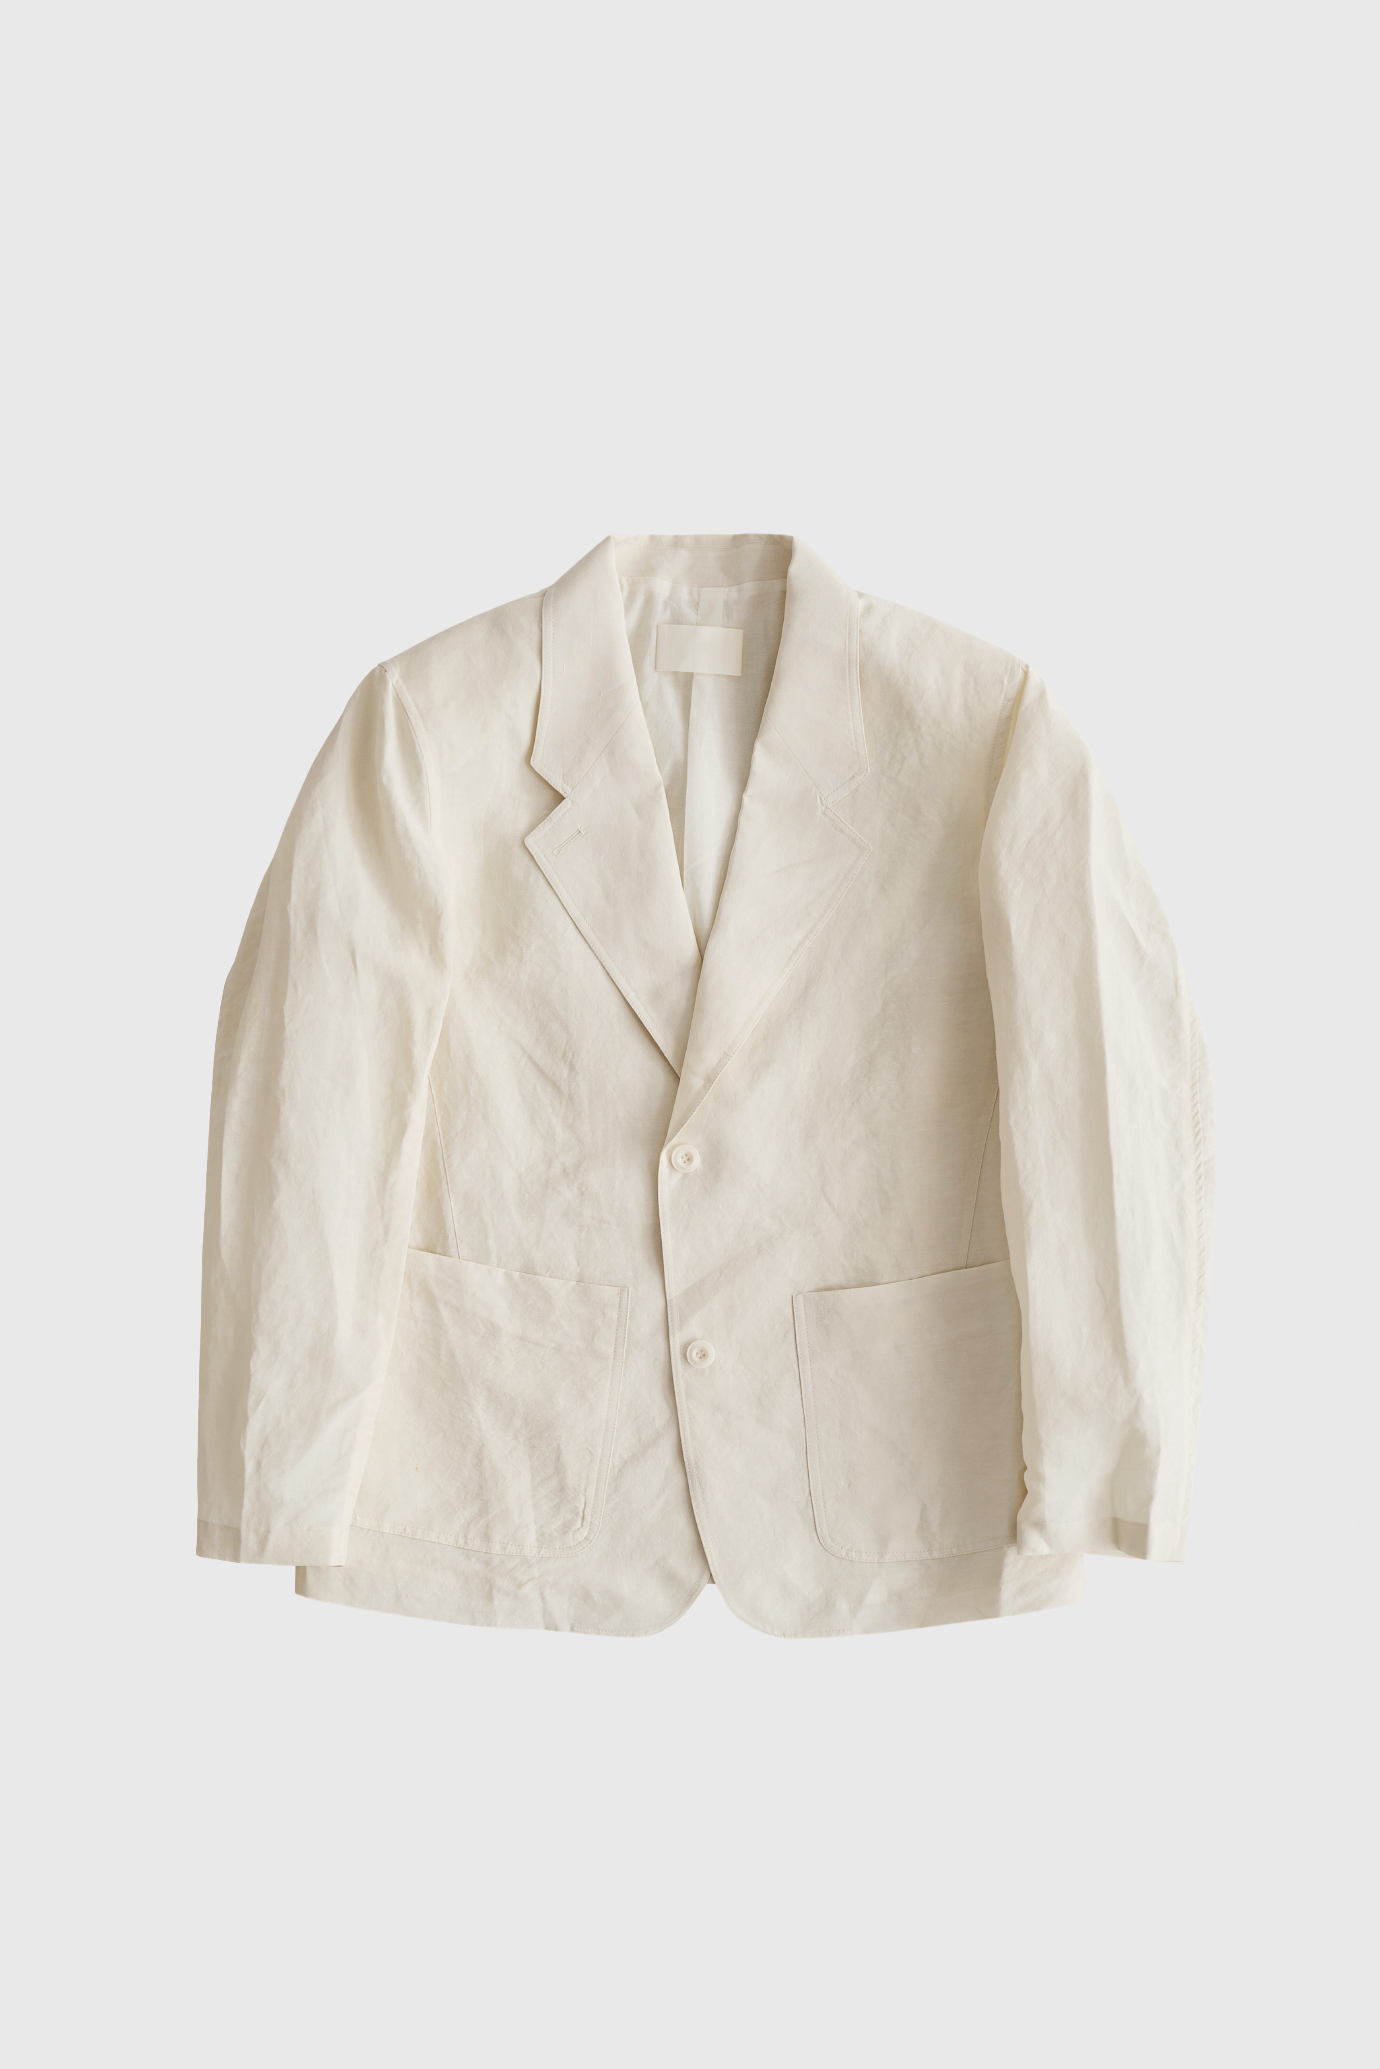 17637_French Linen Jacket